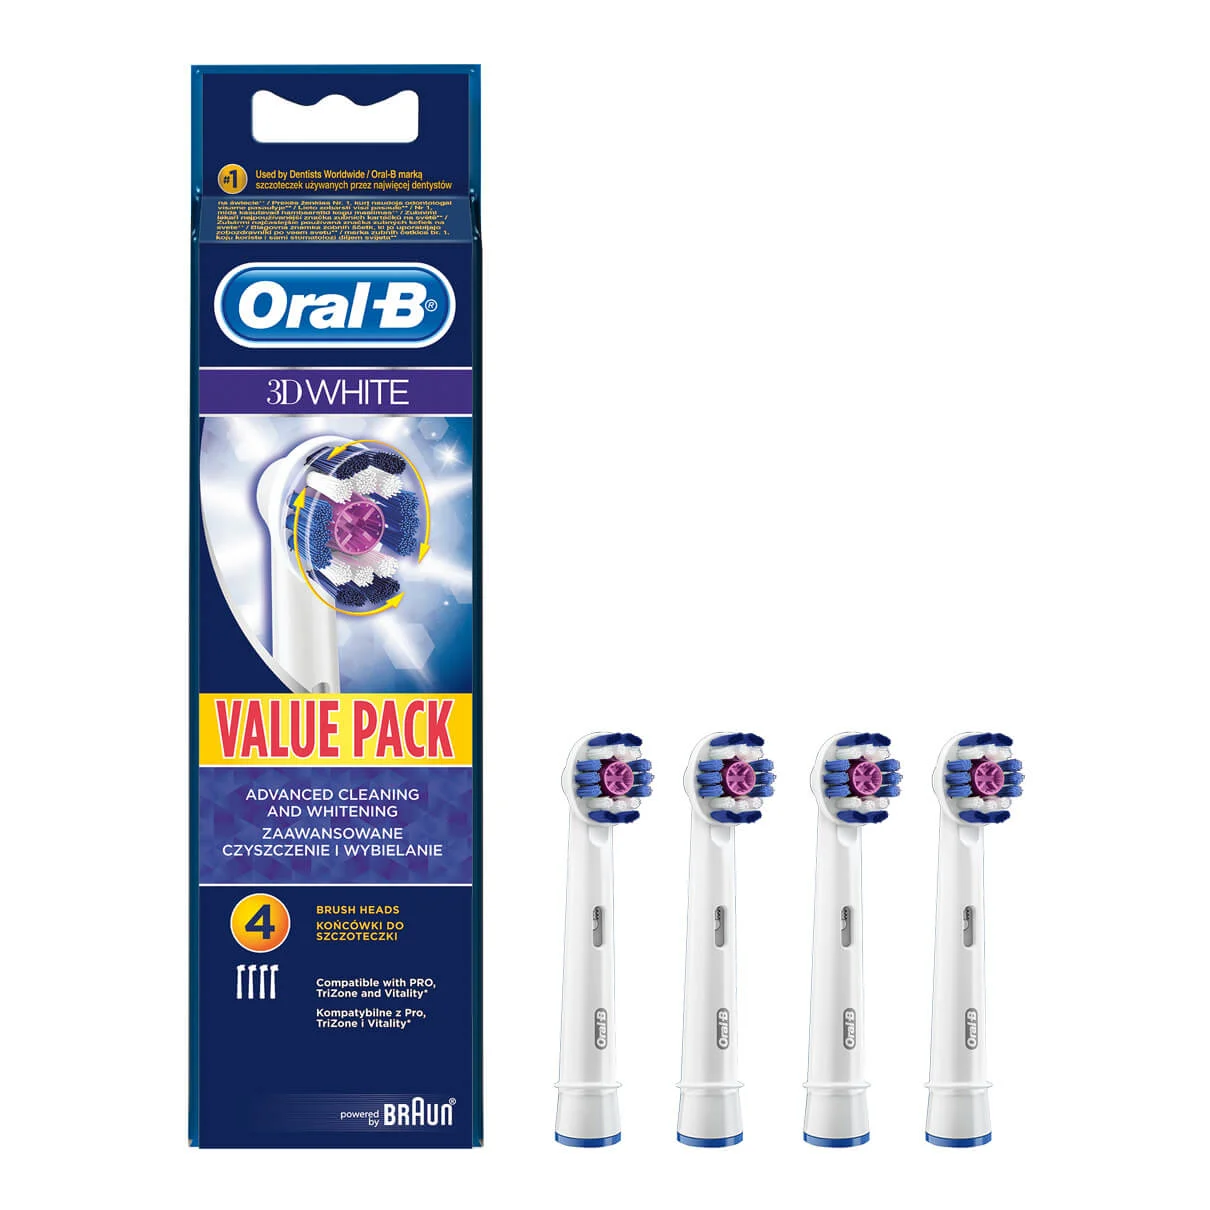  Oral-B 3D White Replacement Brush Heads 